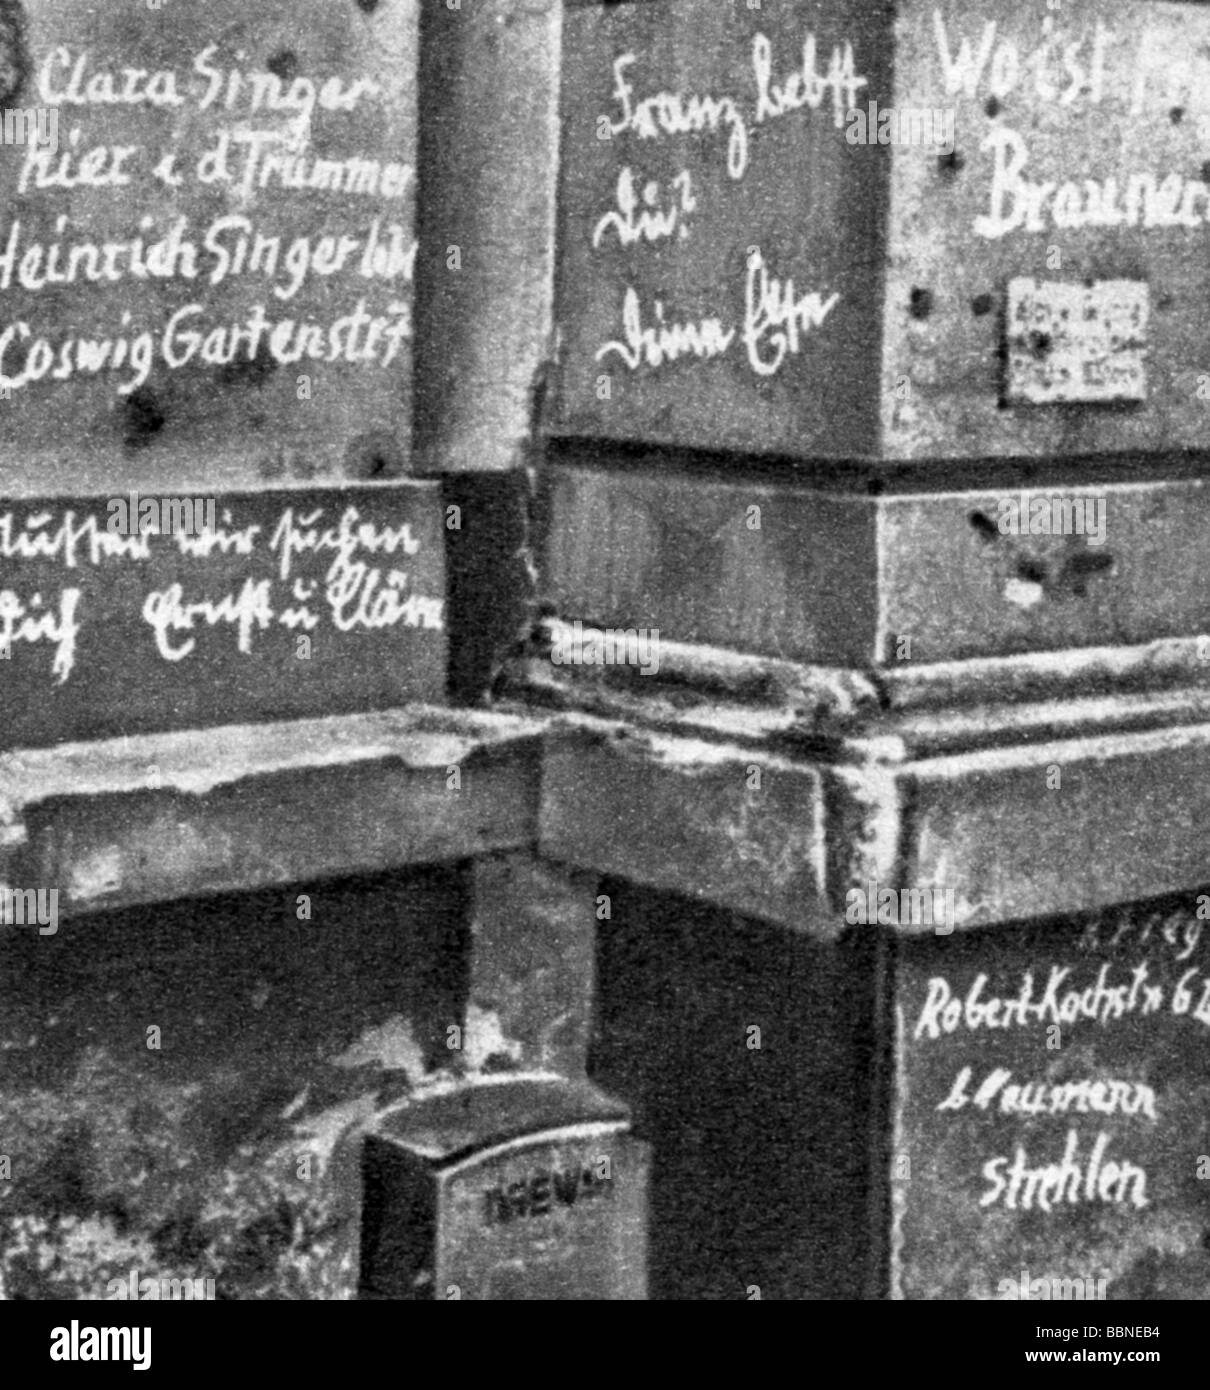 events, Second World War / WWII, aerial warfare, Germany, Dresden, inscriptions on a house after the British bombing raid on 13.2.1945, Stock Photo